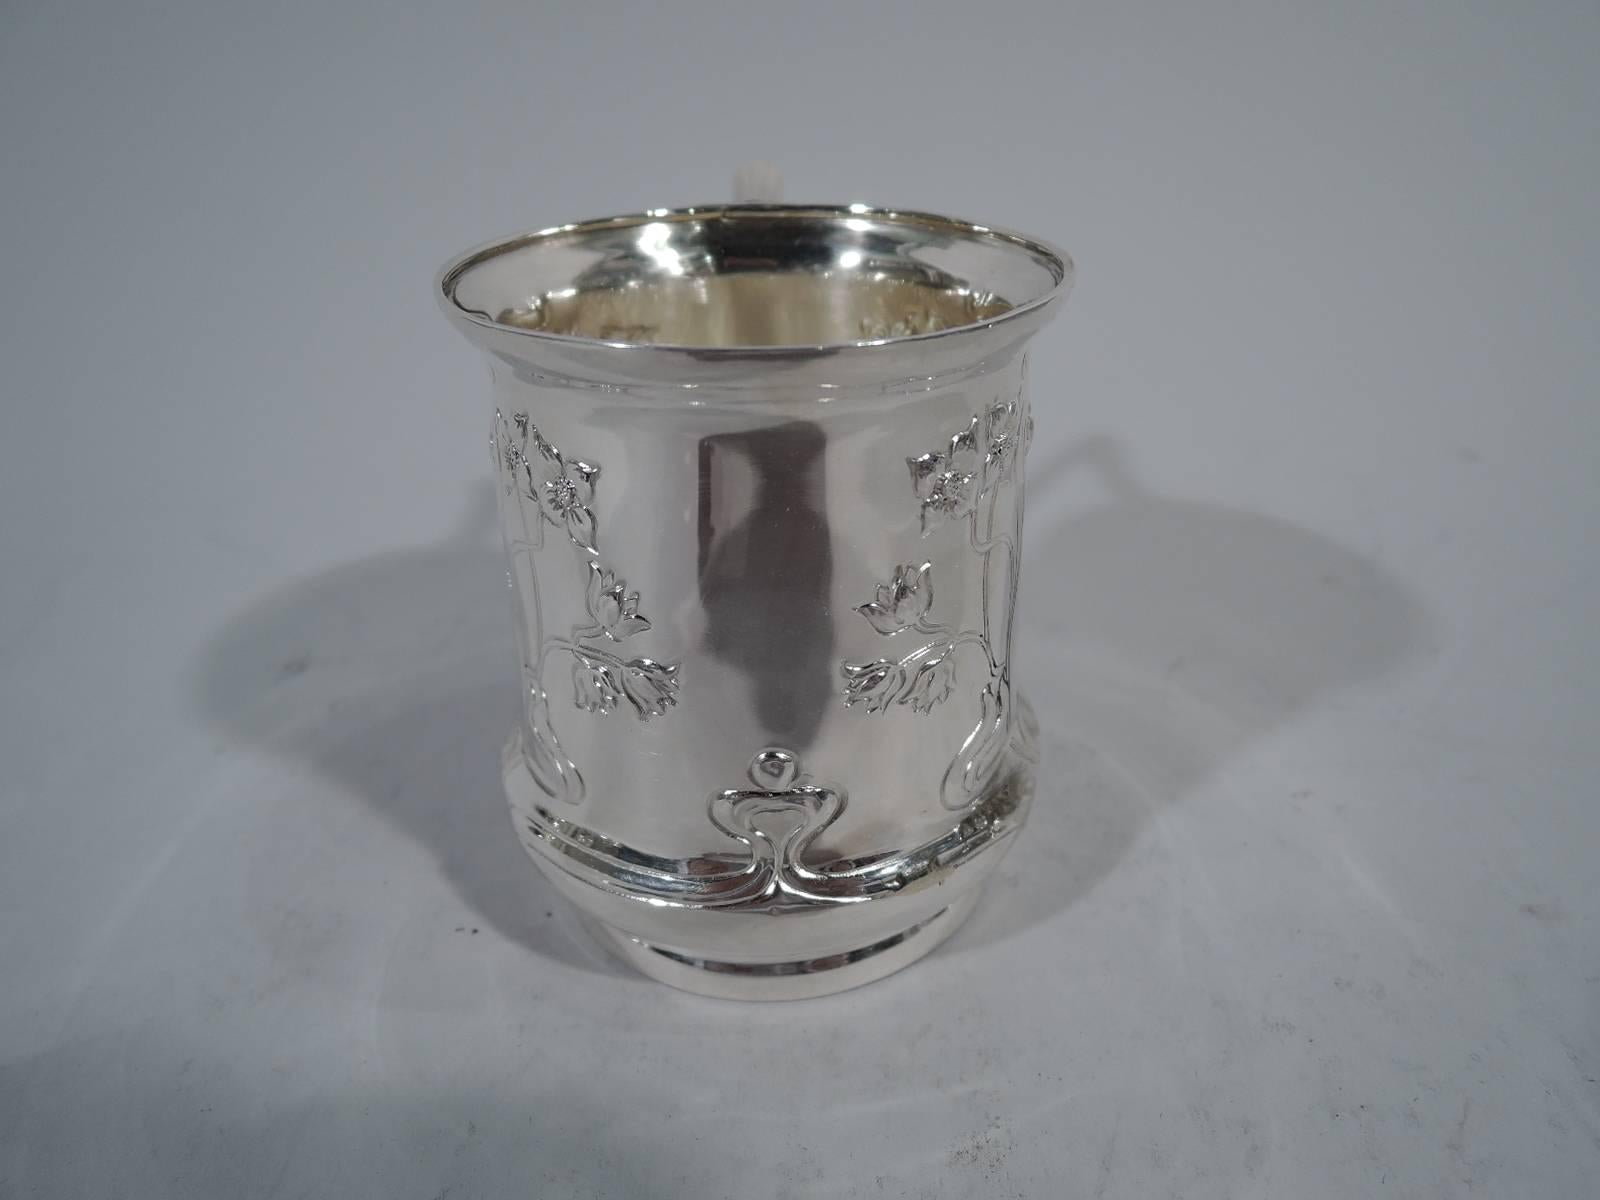 Art Nouveau sterling silver baby cup. Made by George R. Unite in Birmingham in 1905. Discreet baluster with flared rim, reeded and scrolled bracket handle, and short foot. Interlacing and whiplash flowers and tendrils forming two frames (vacant). An